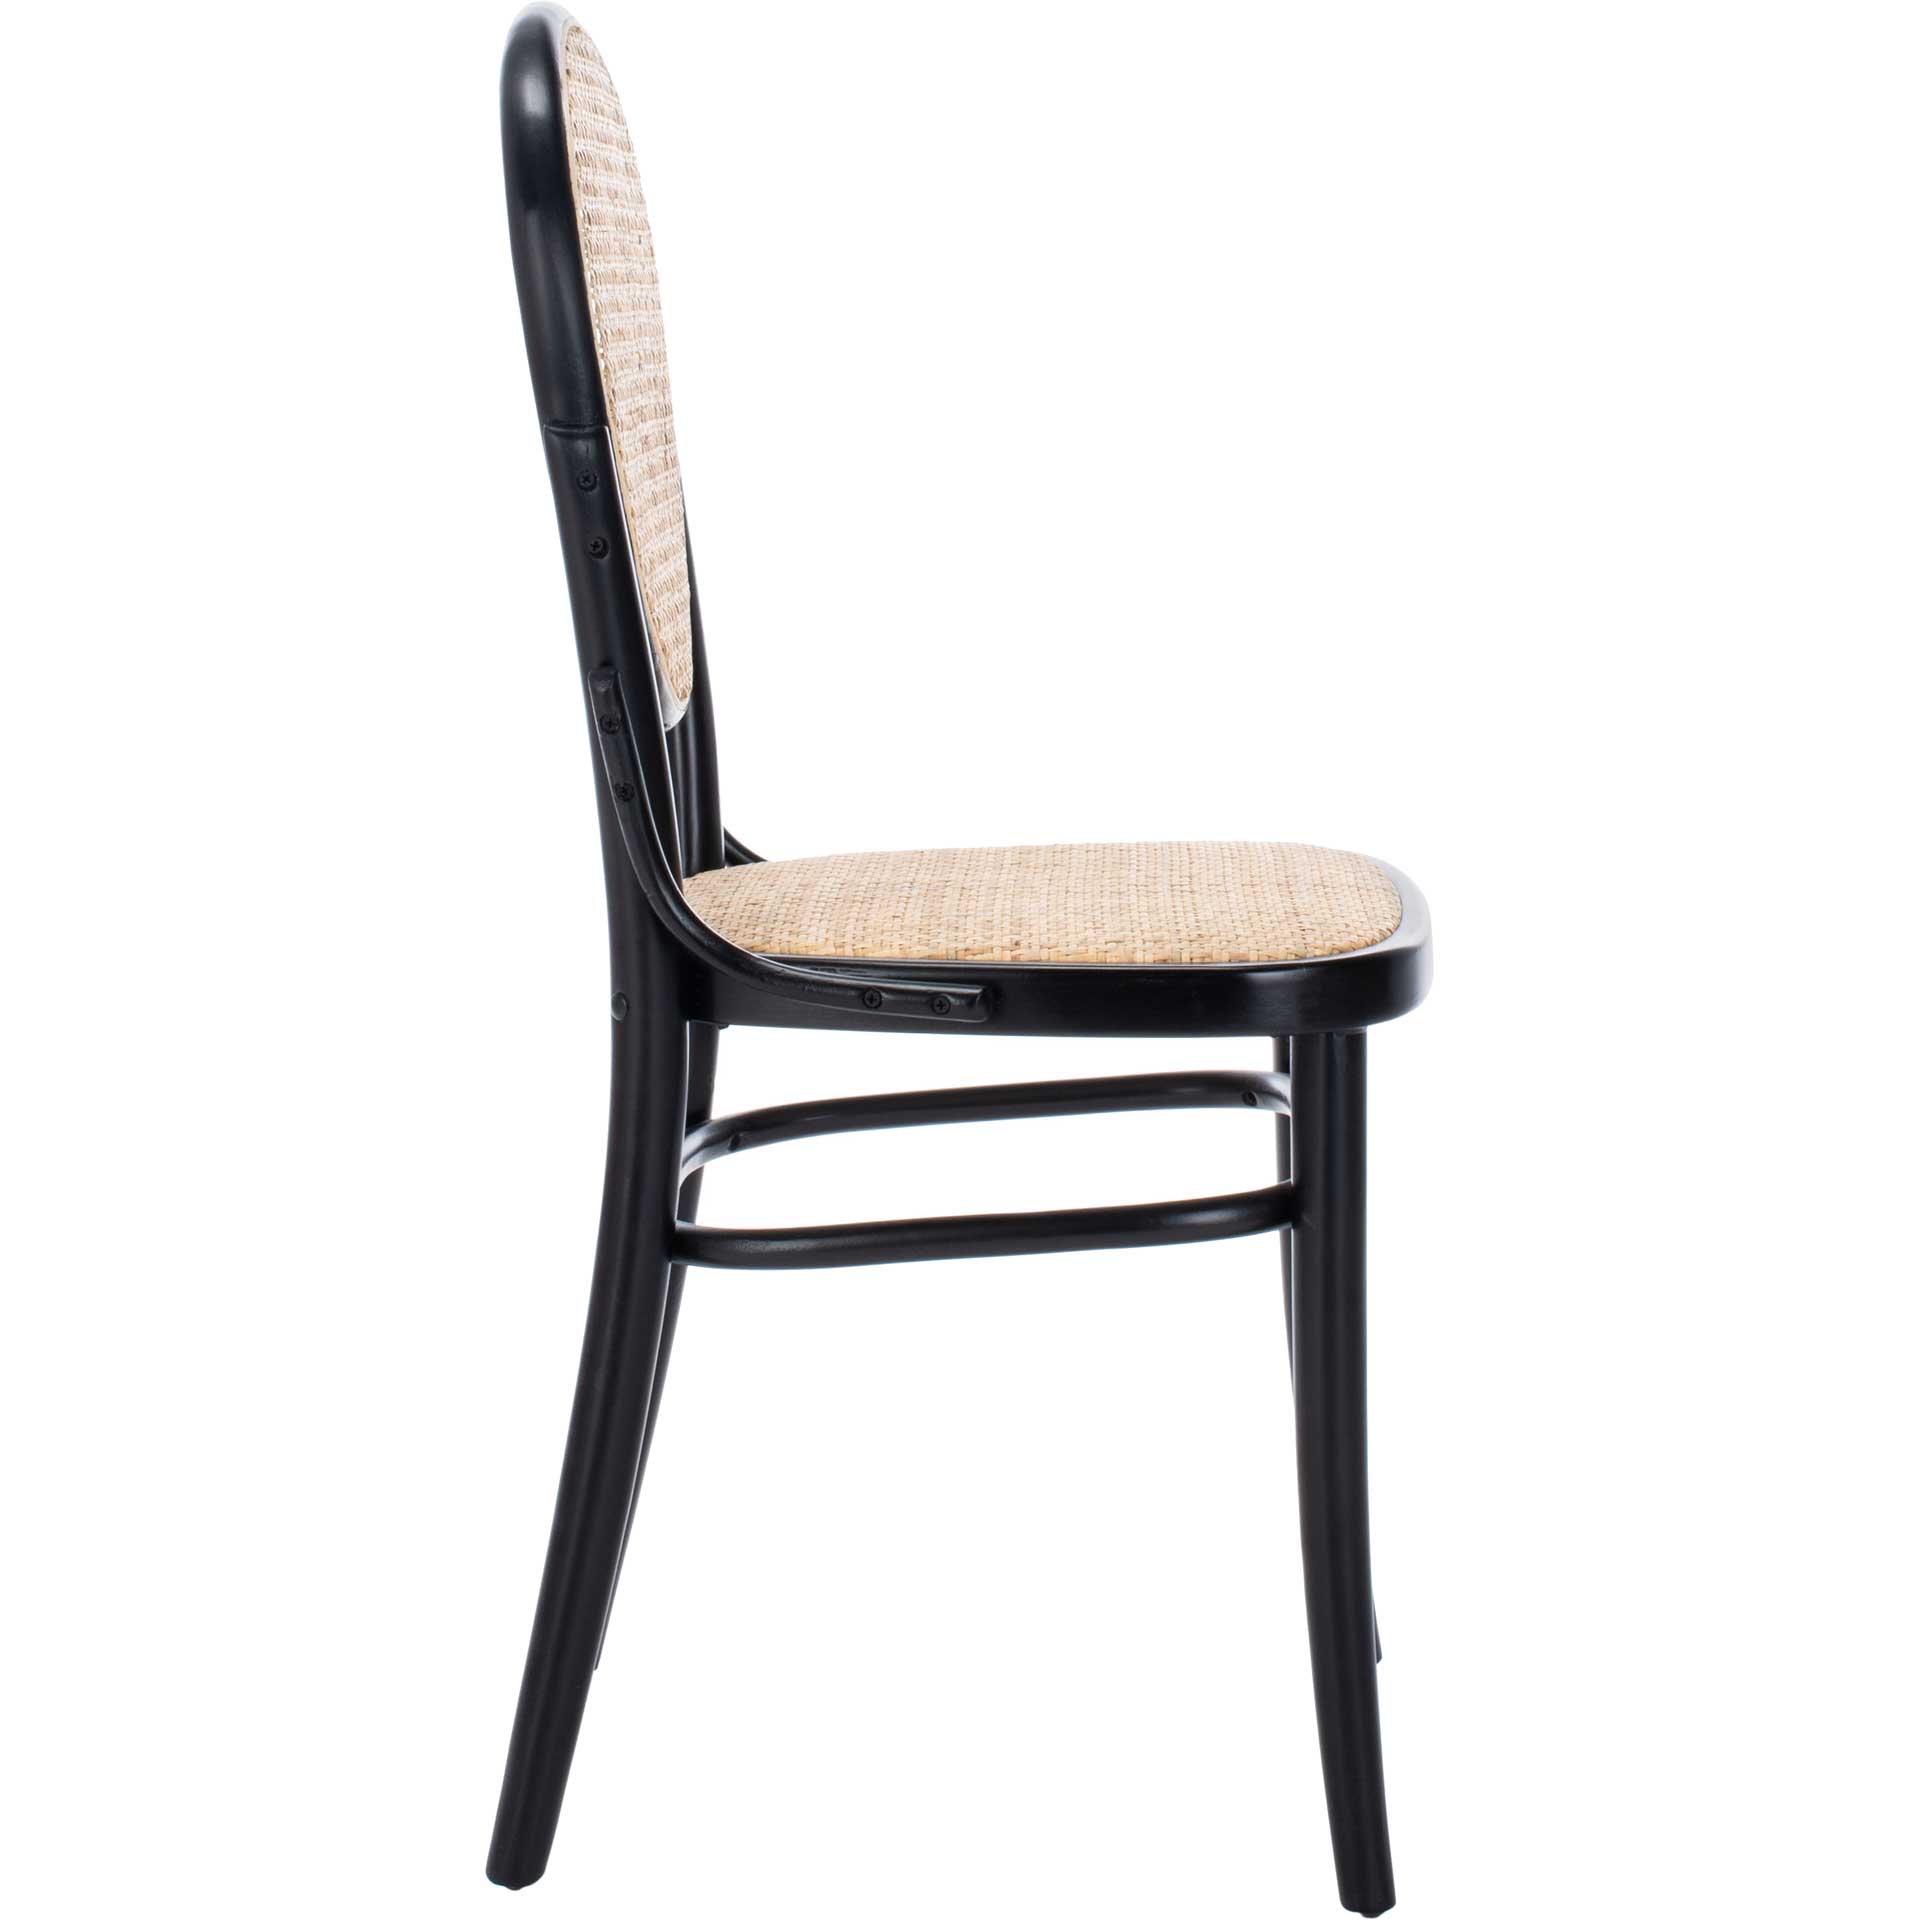 Sonia Cane Dining Chair Black/Natural (Set of 2)